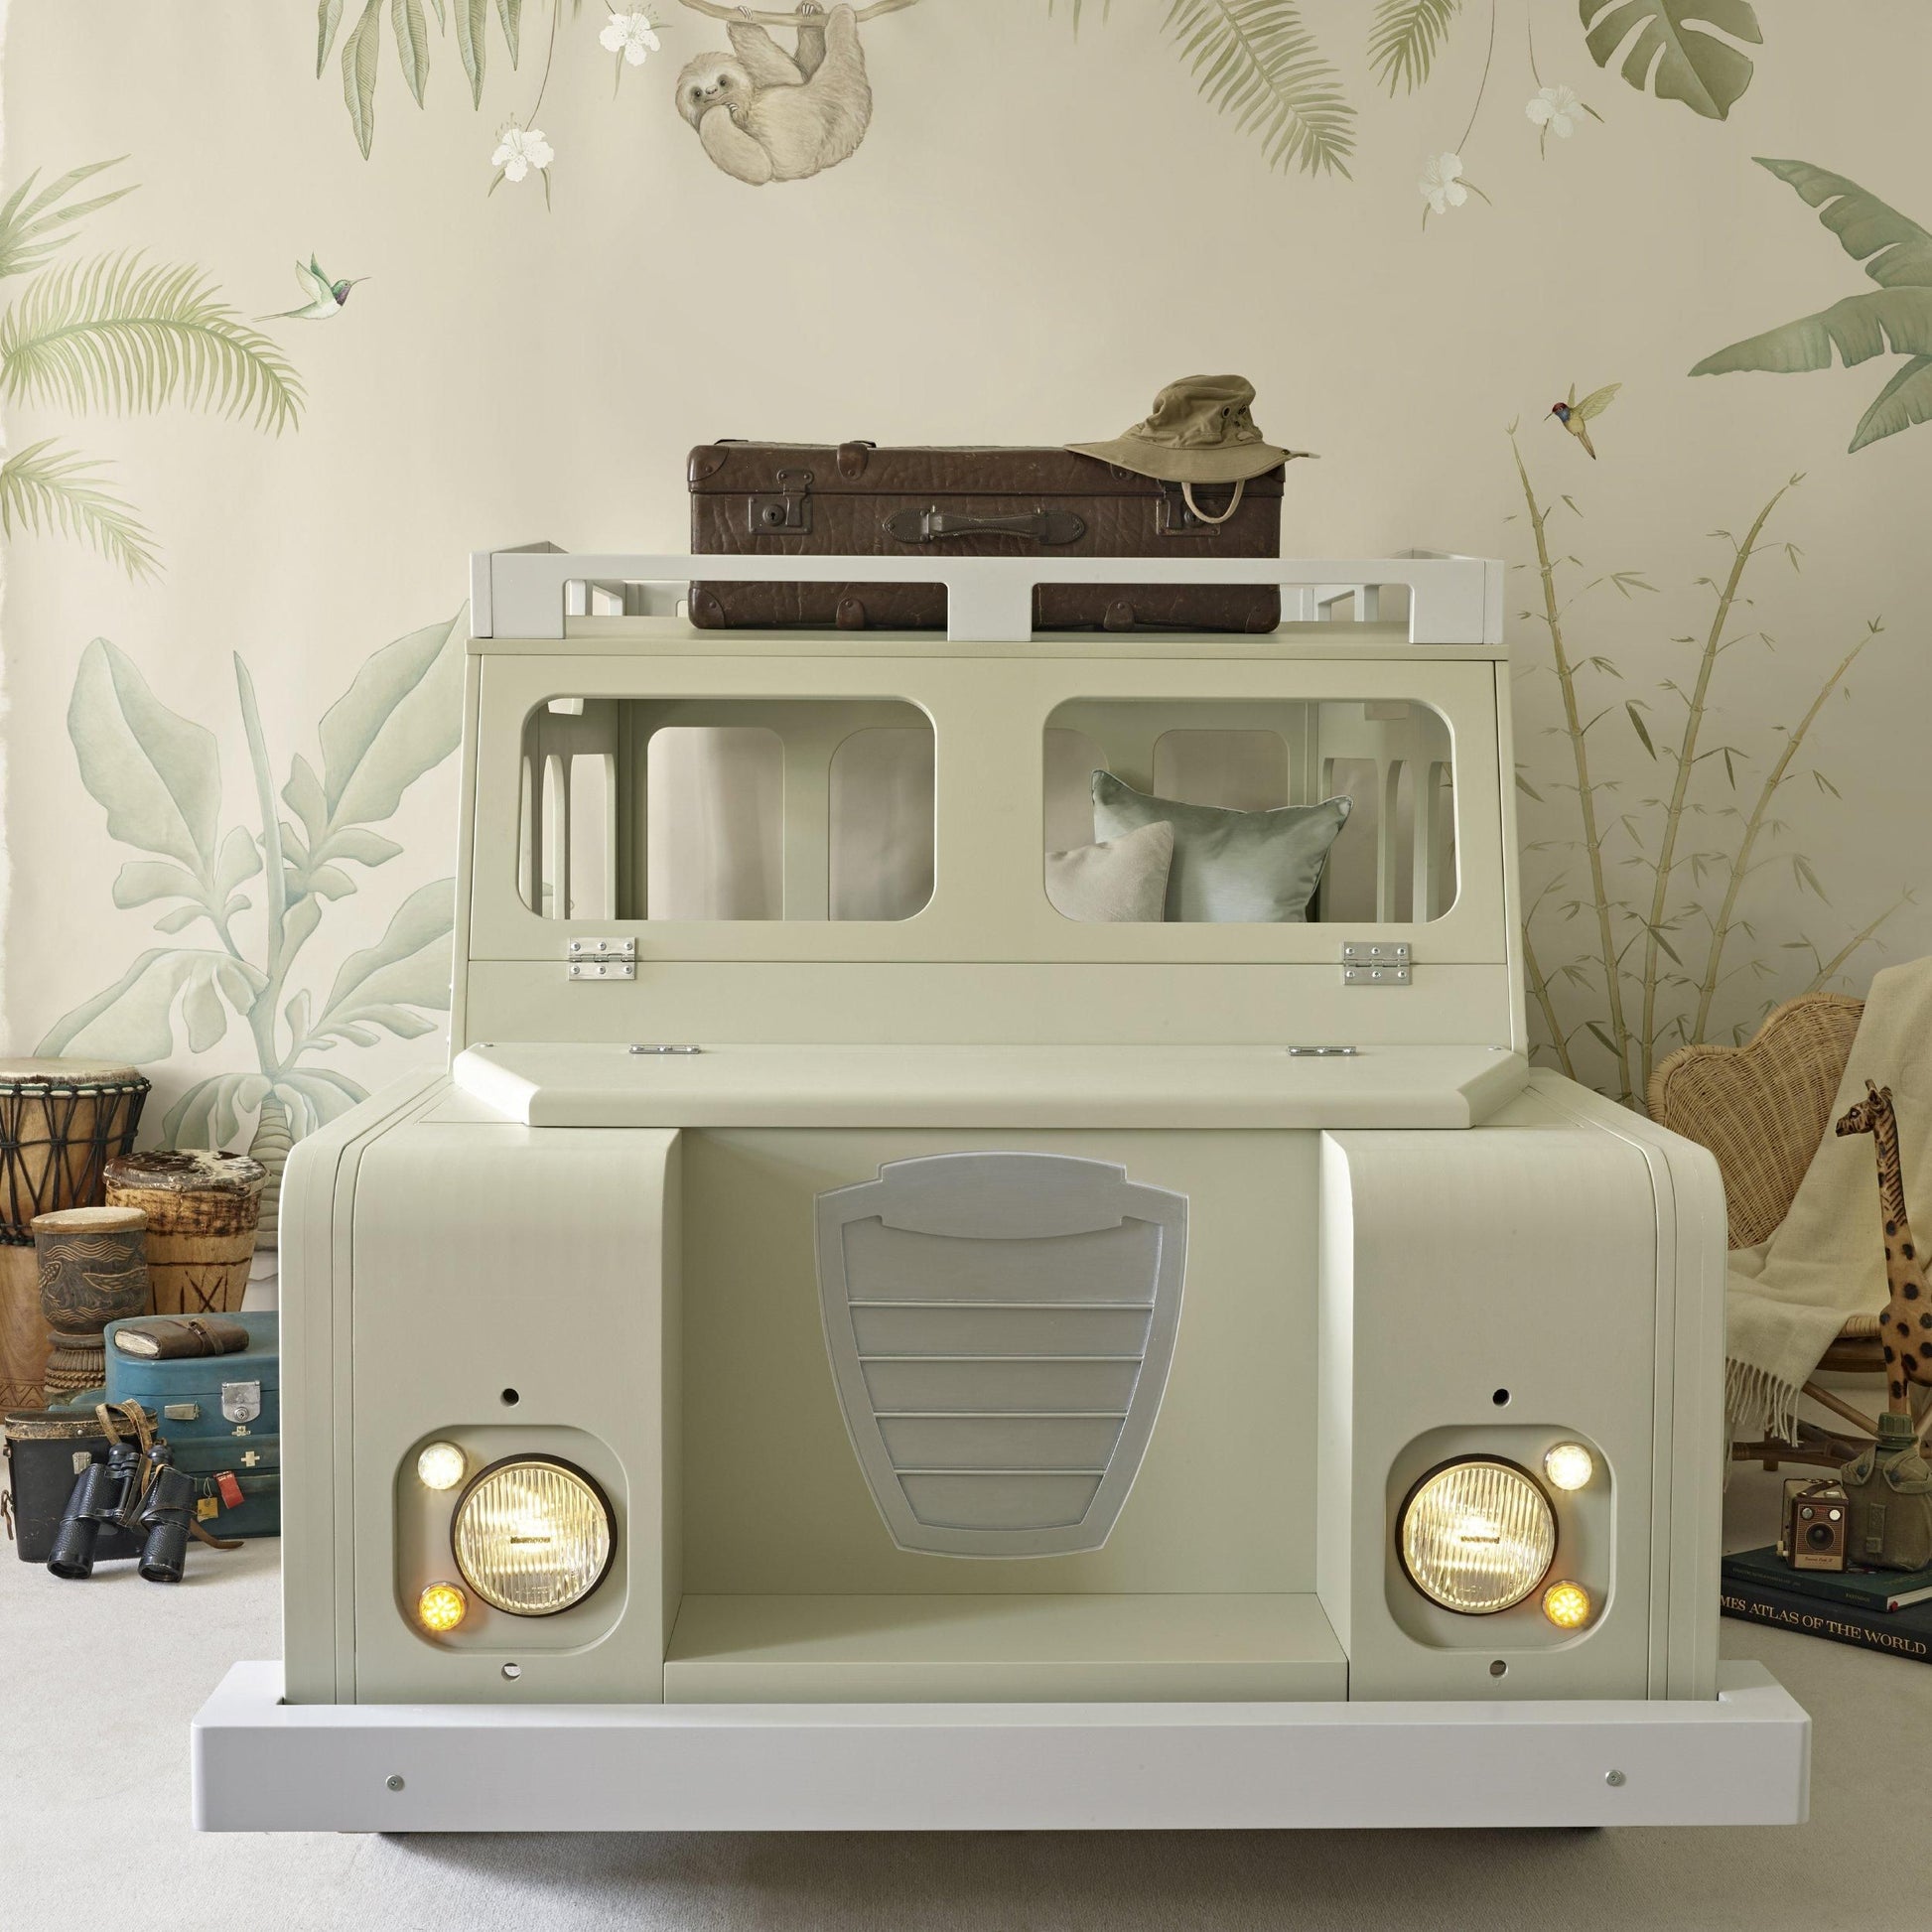 The Dragons JB23 - Jeep Bed - Safari jeep bed for kids - Front view | Dragons of Walton Street